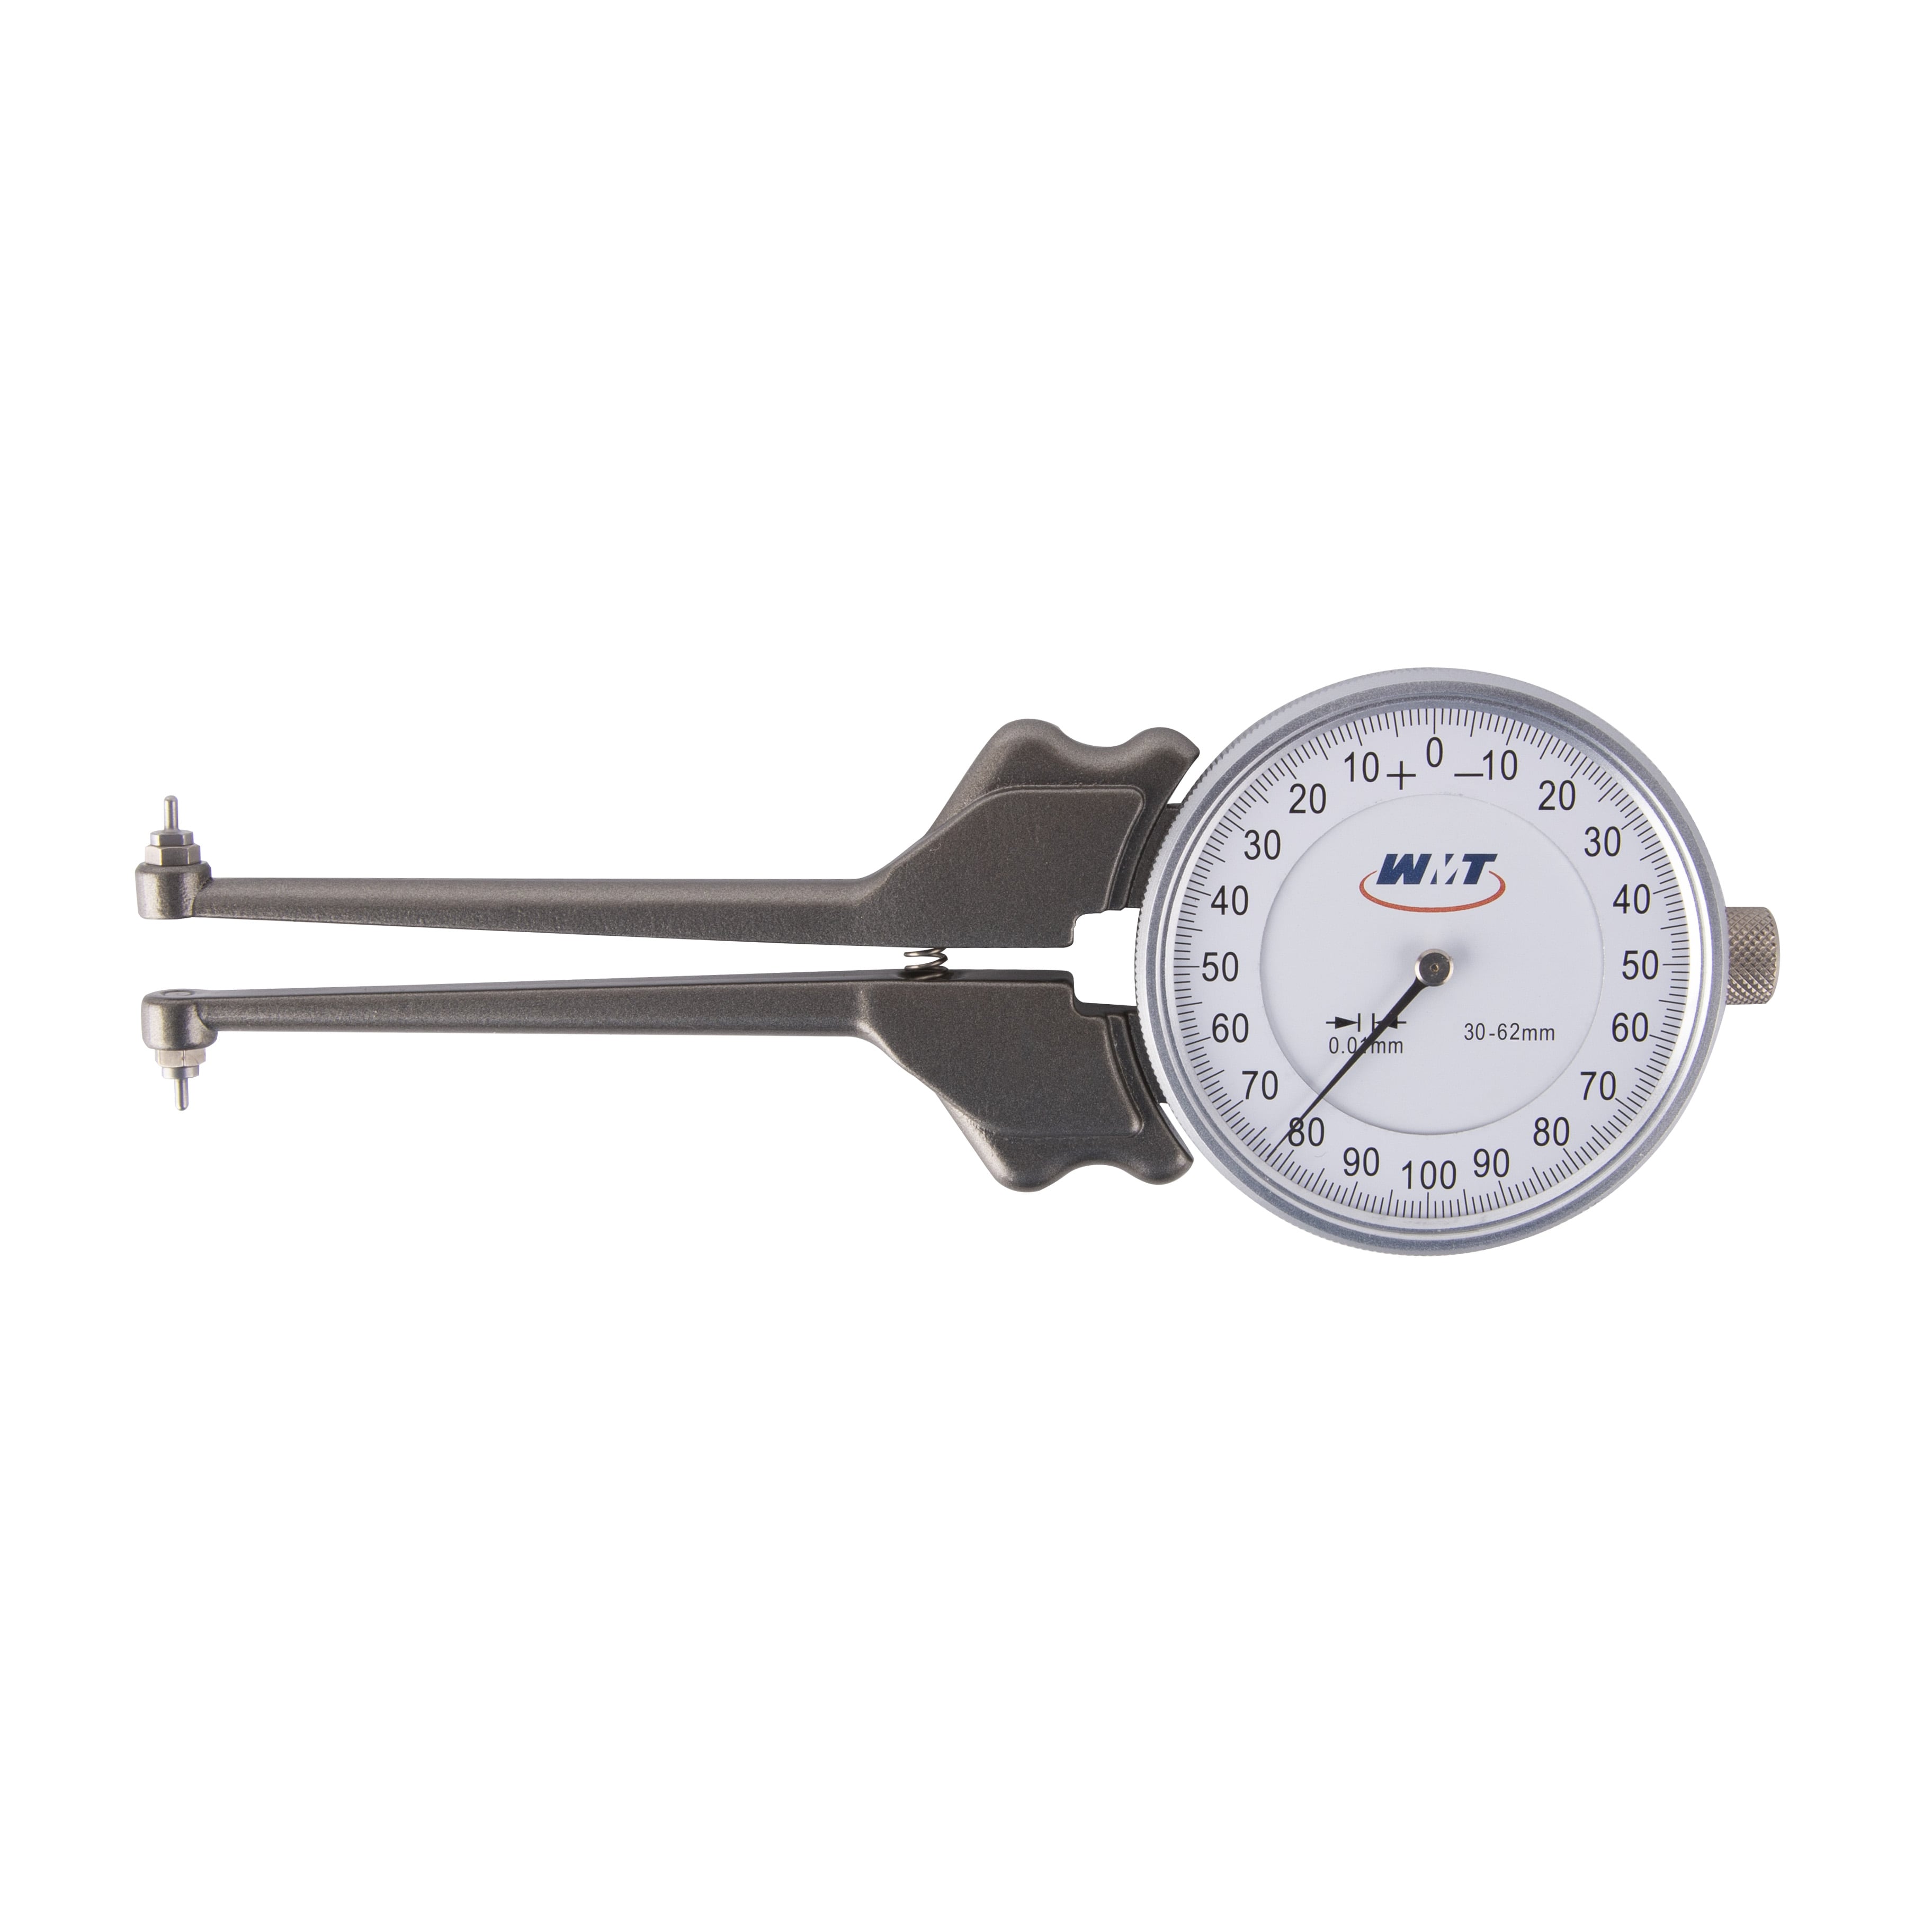 Inside Dial Caliper Gauges With Anvils515-104